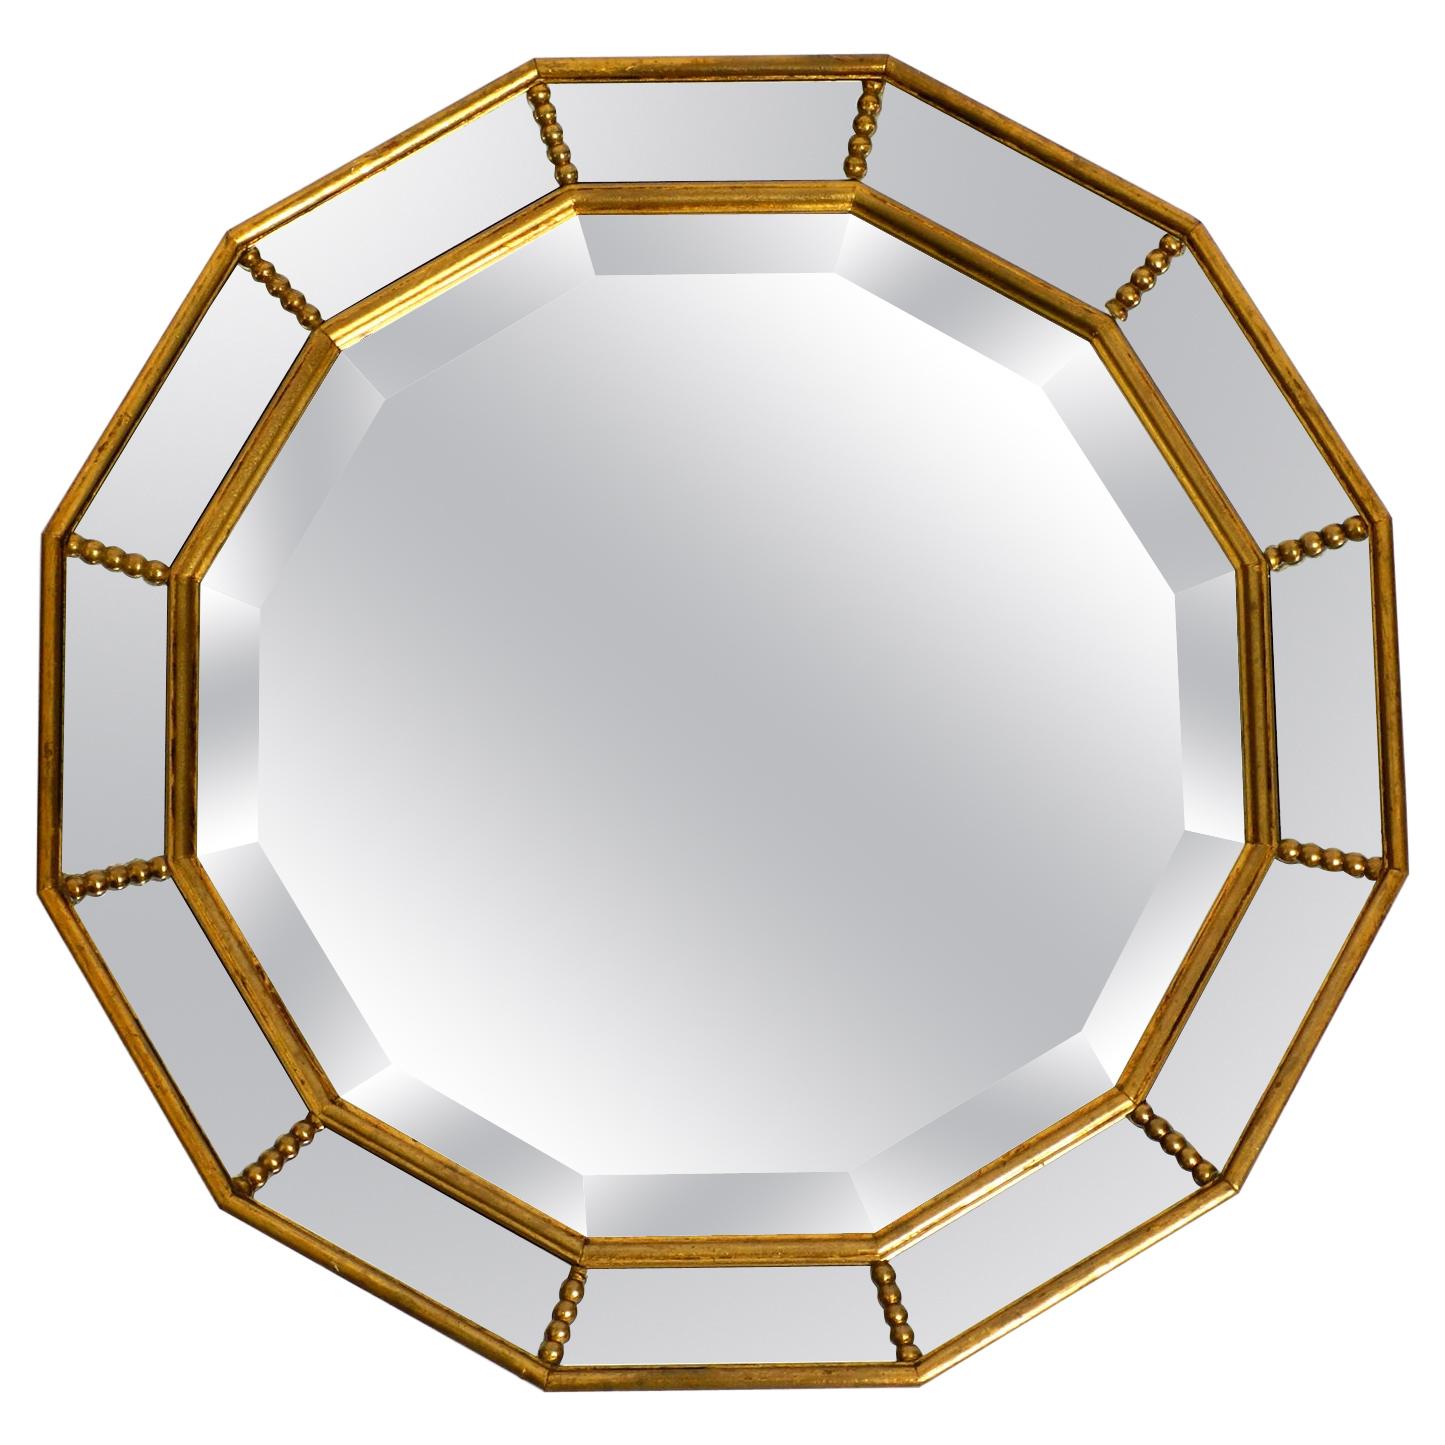 Beautiful Italian 12 Sided Gold-Plated Wall Mirror with Facet Cut from the 1960s